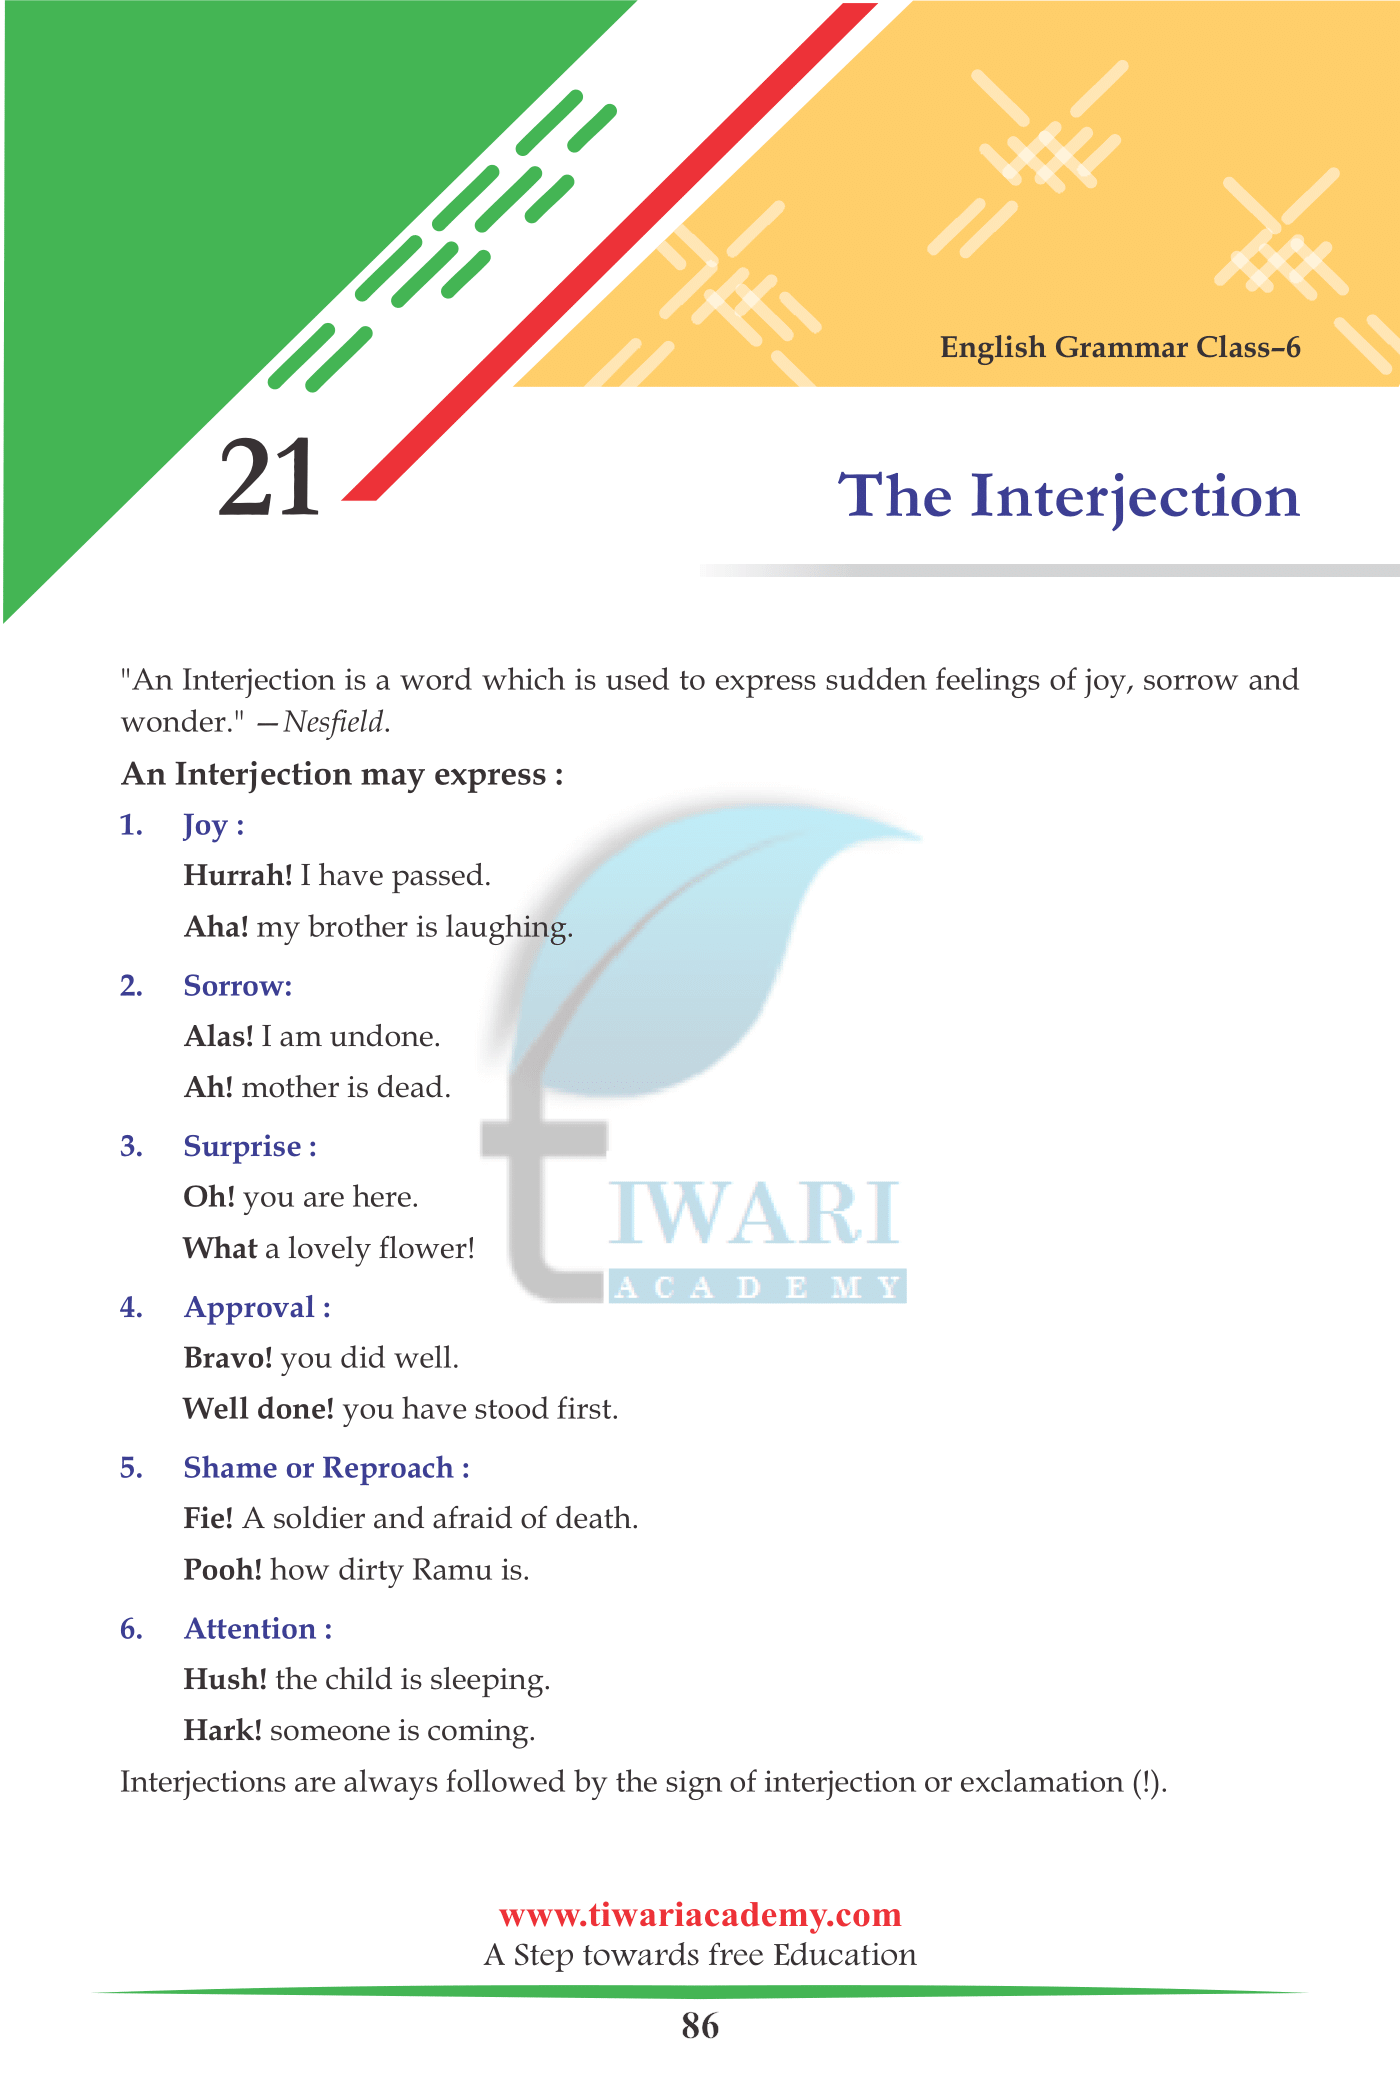 6th English Grammar Interjection or Exclamation